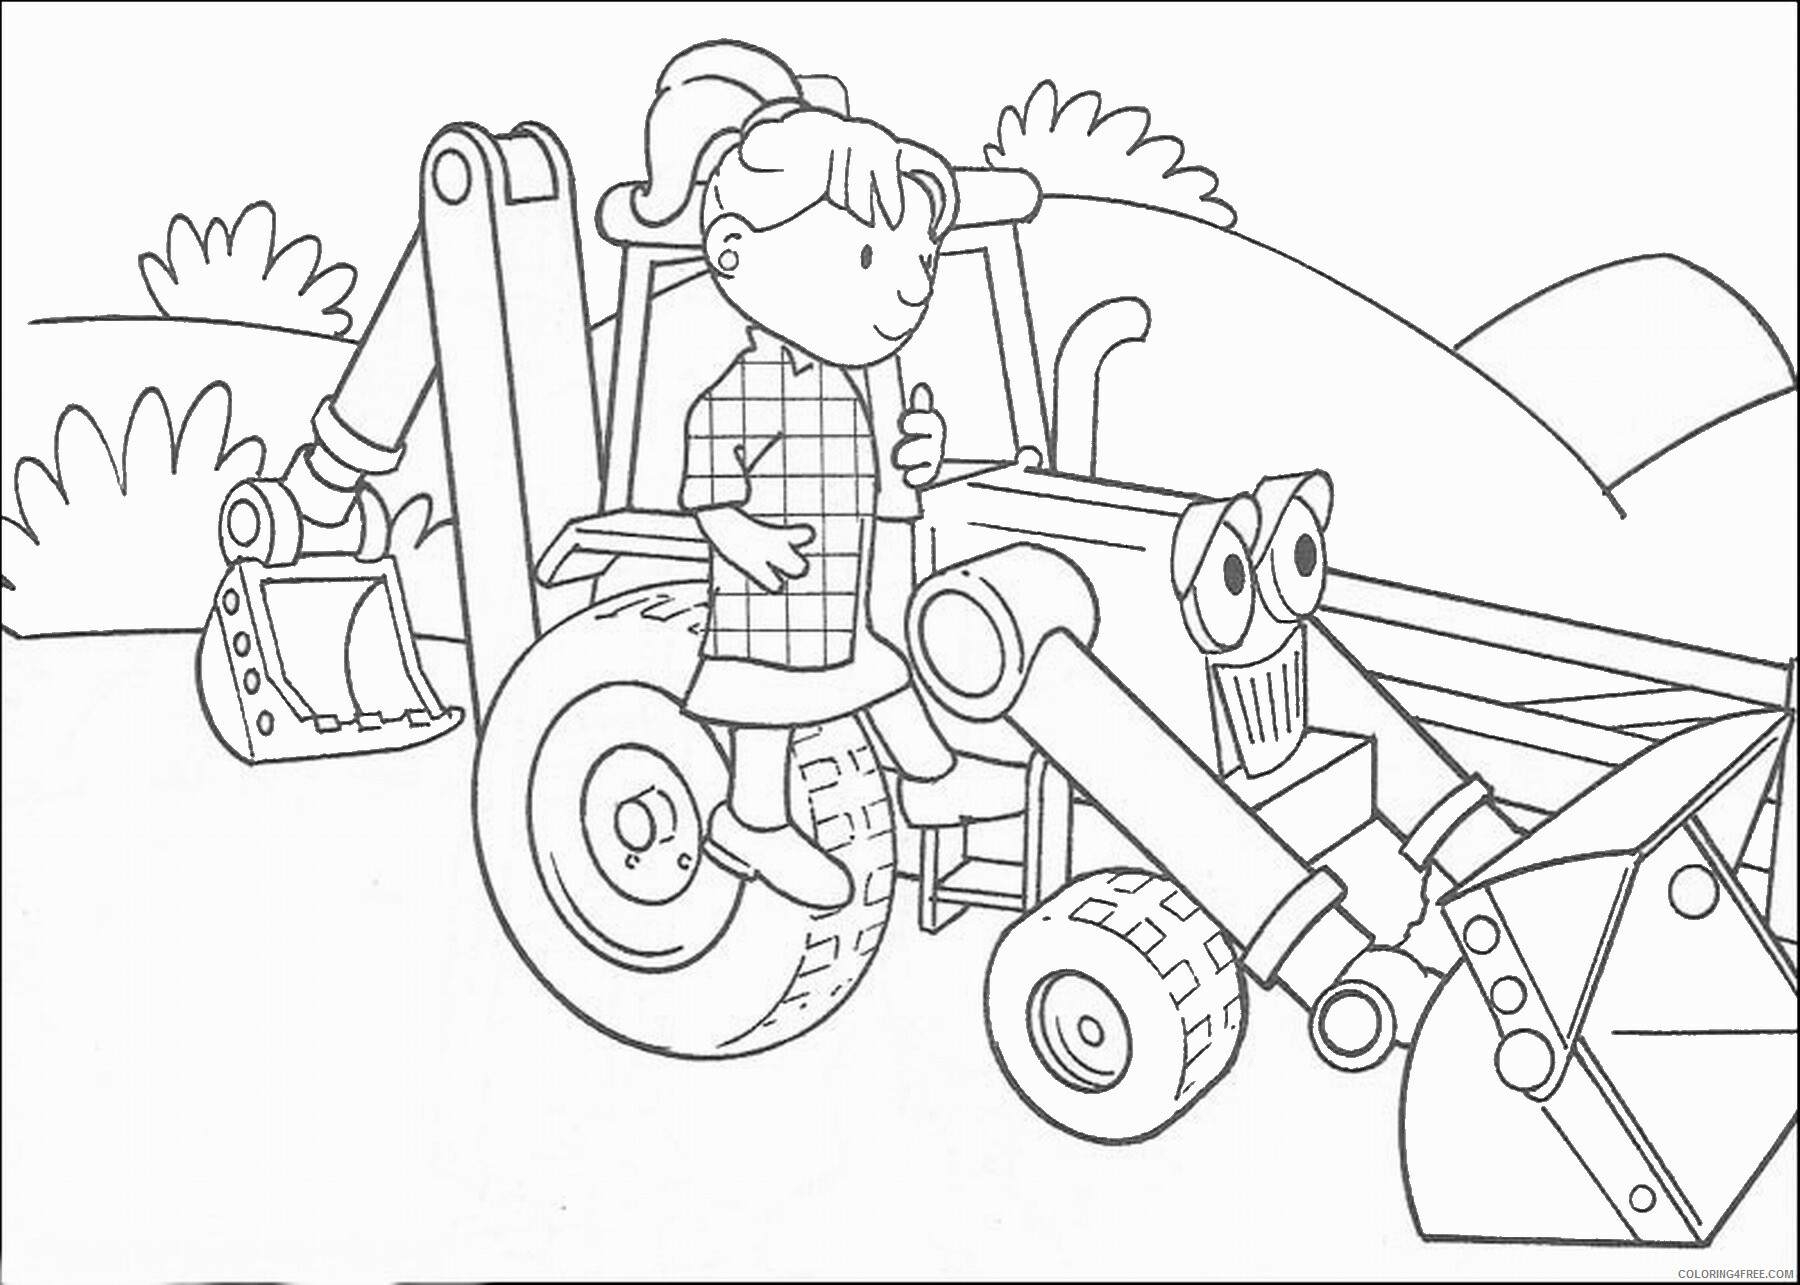 Bob the Builder Coloring Pages TV Film bob the builder_17 Printable 2020 00967 Coloring4free